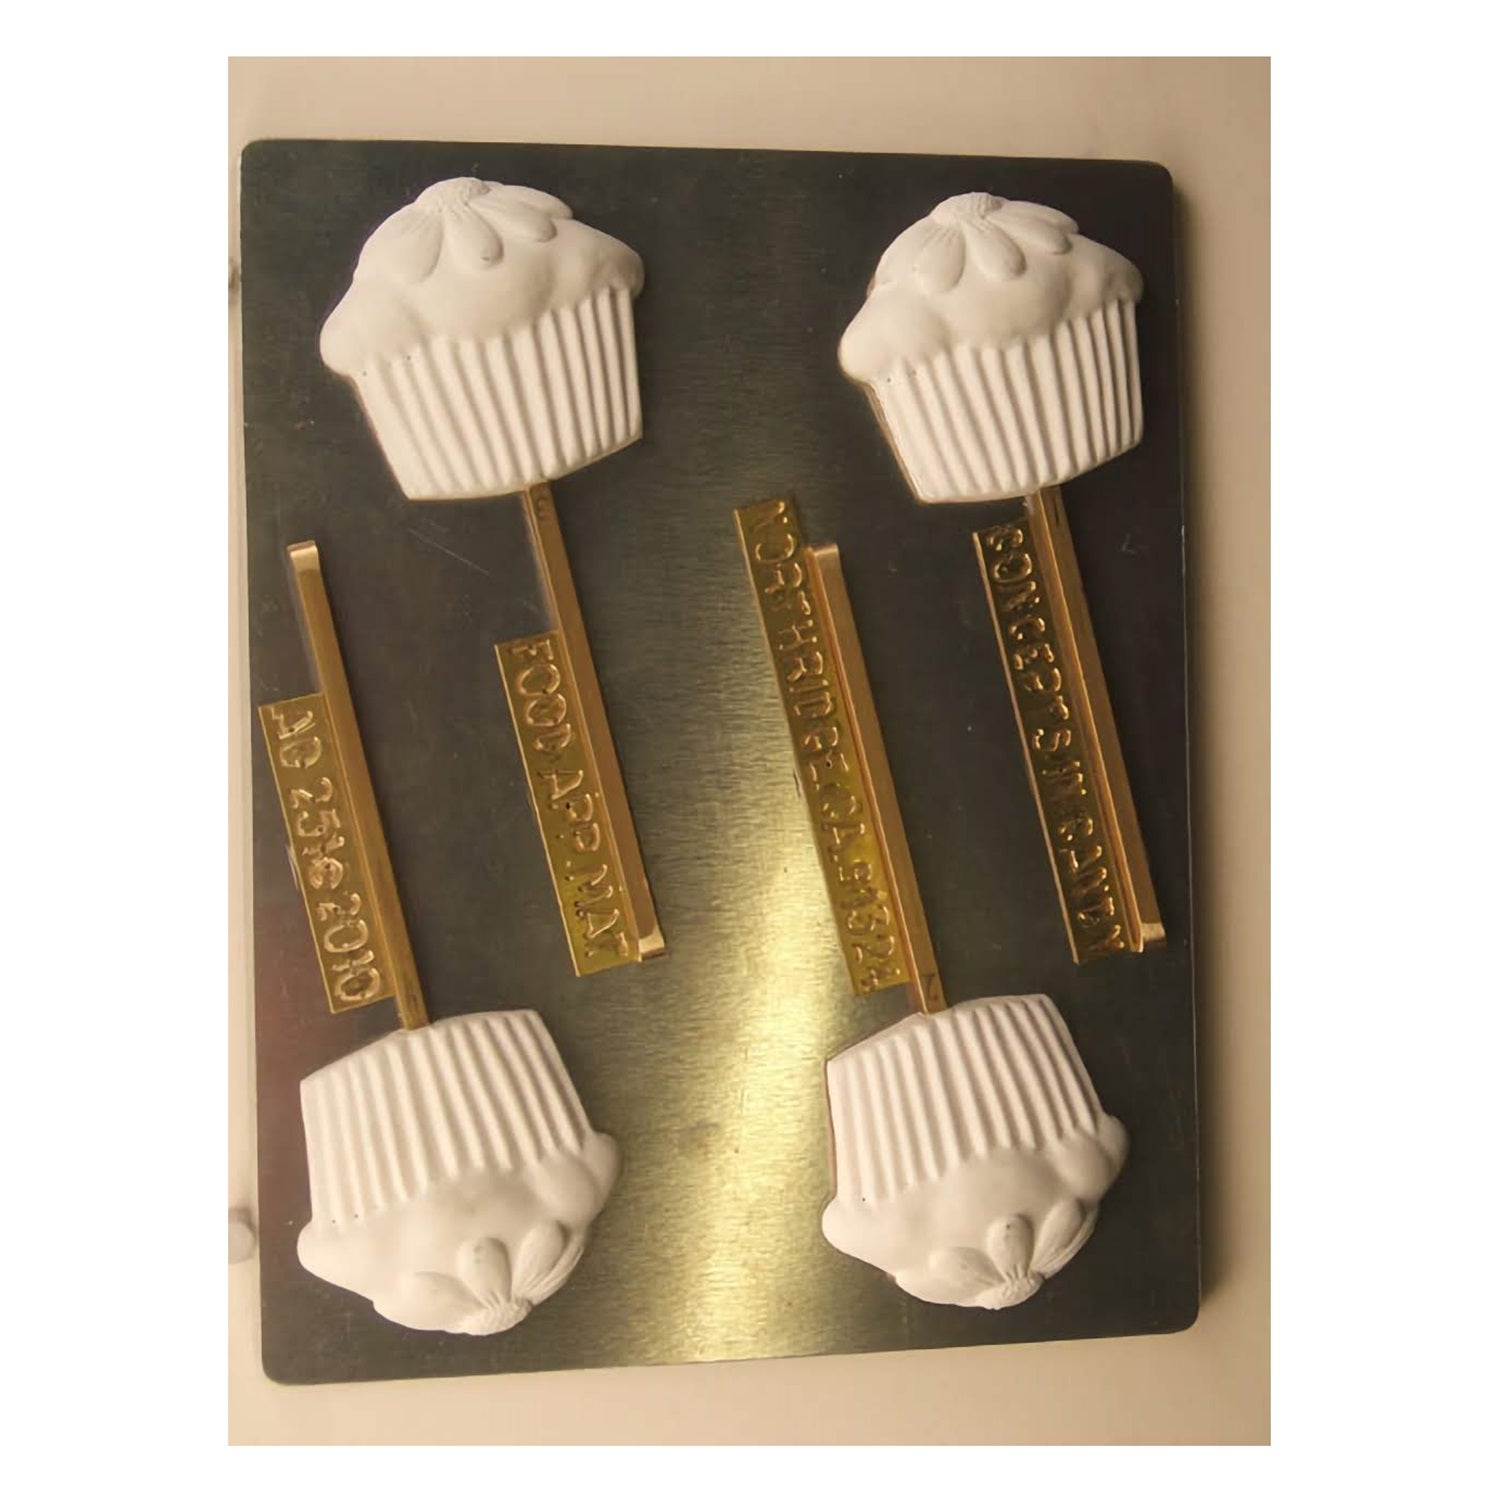 This image shows a chocolate mold used for making cupcake-shaped lollipops. The mold has three cavities, each designed to shape chocolate into a cupcake with a daisy on top